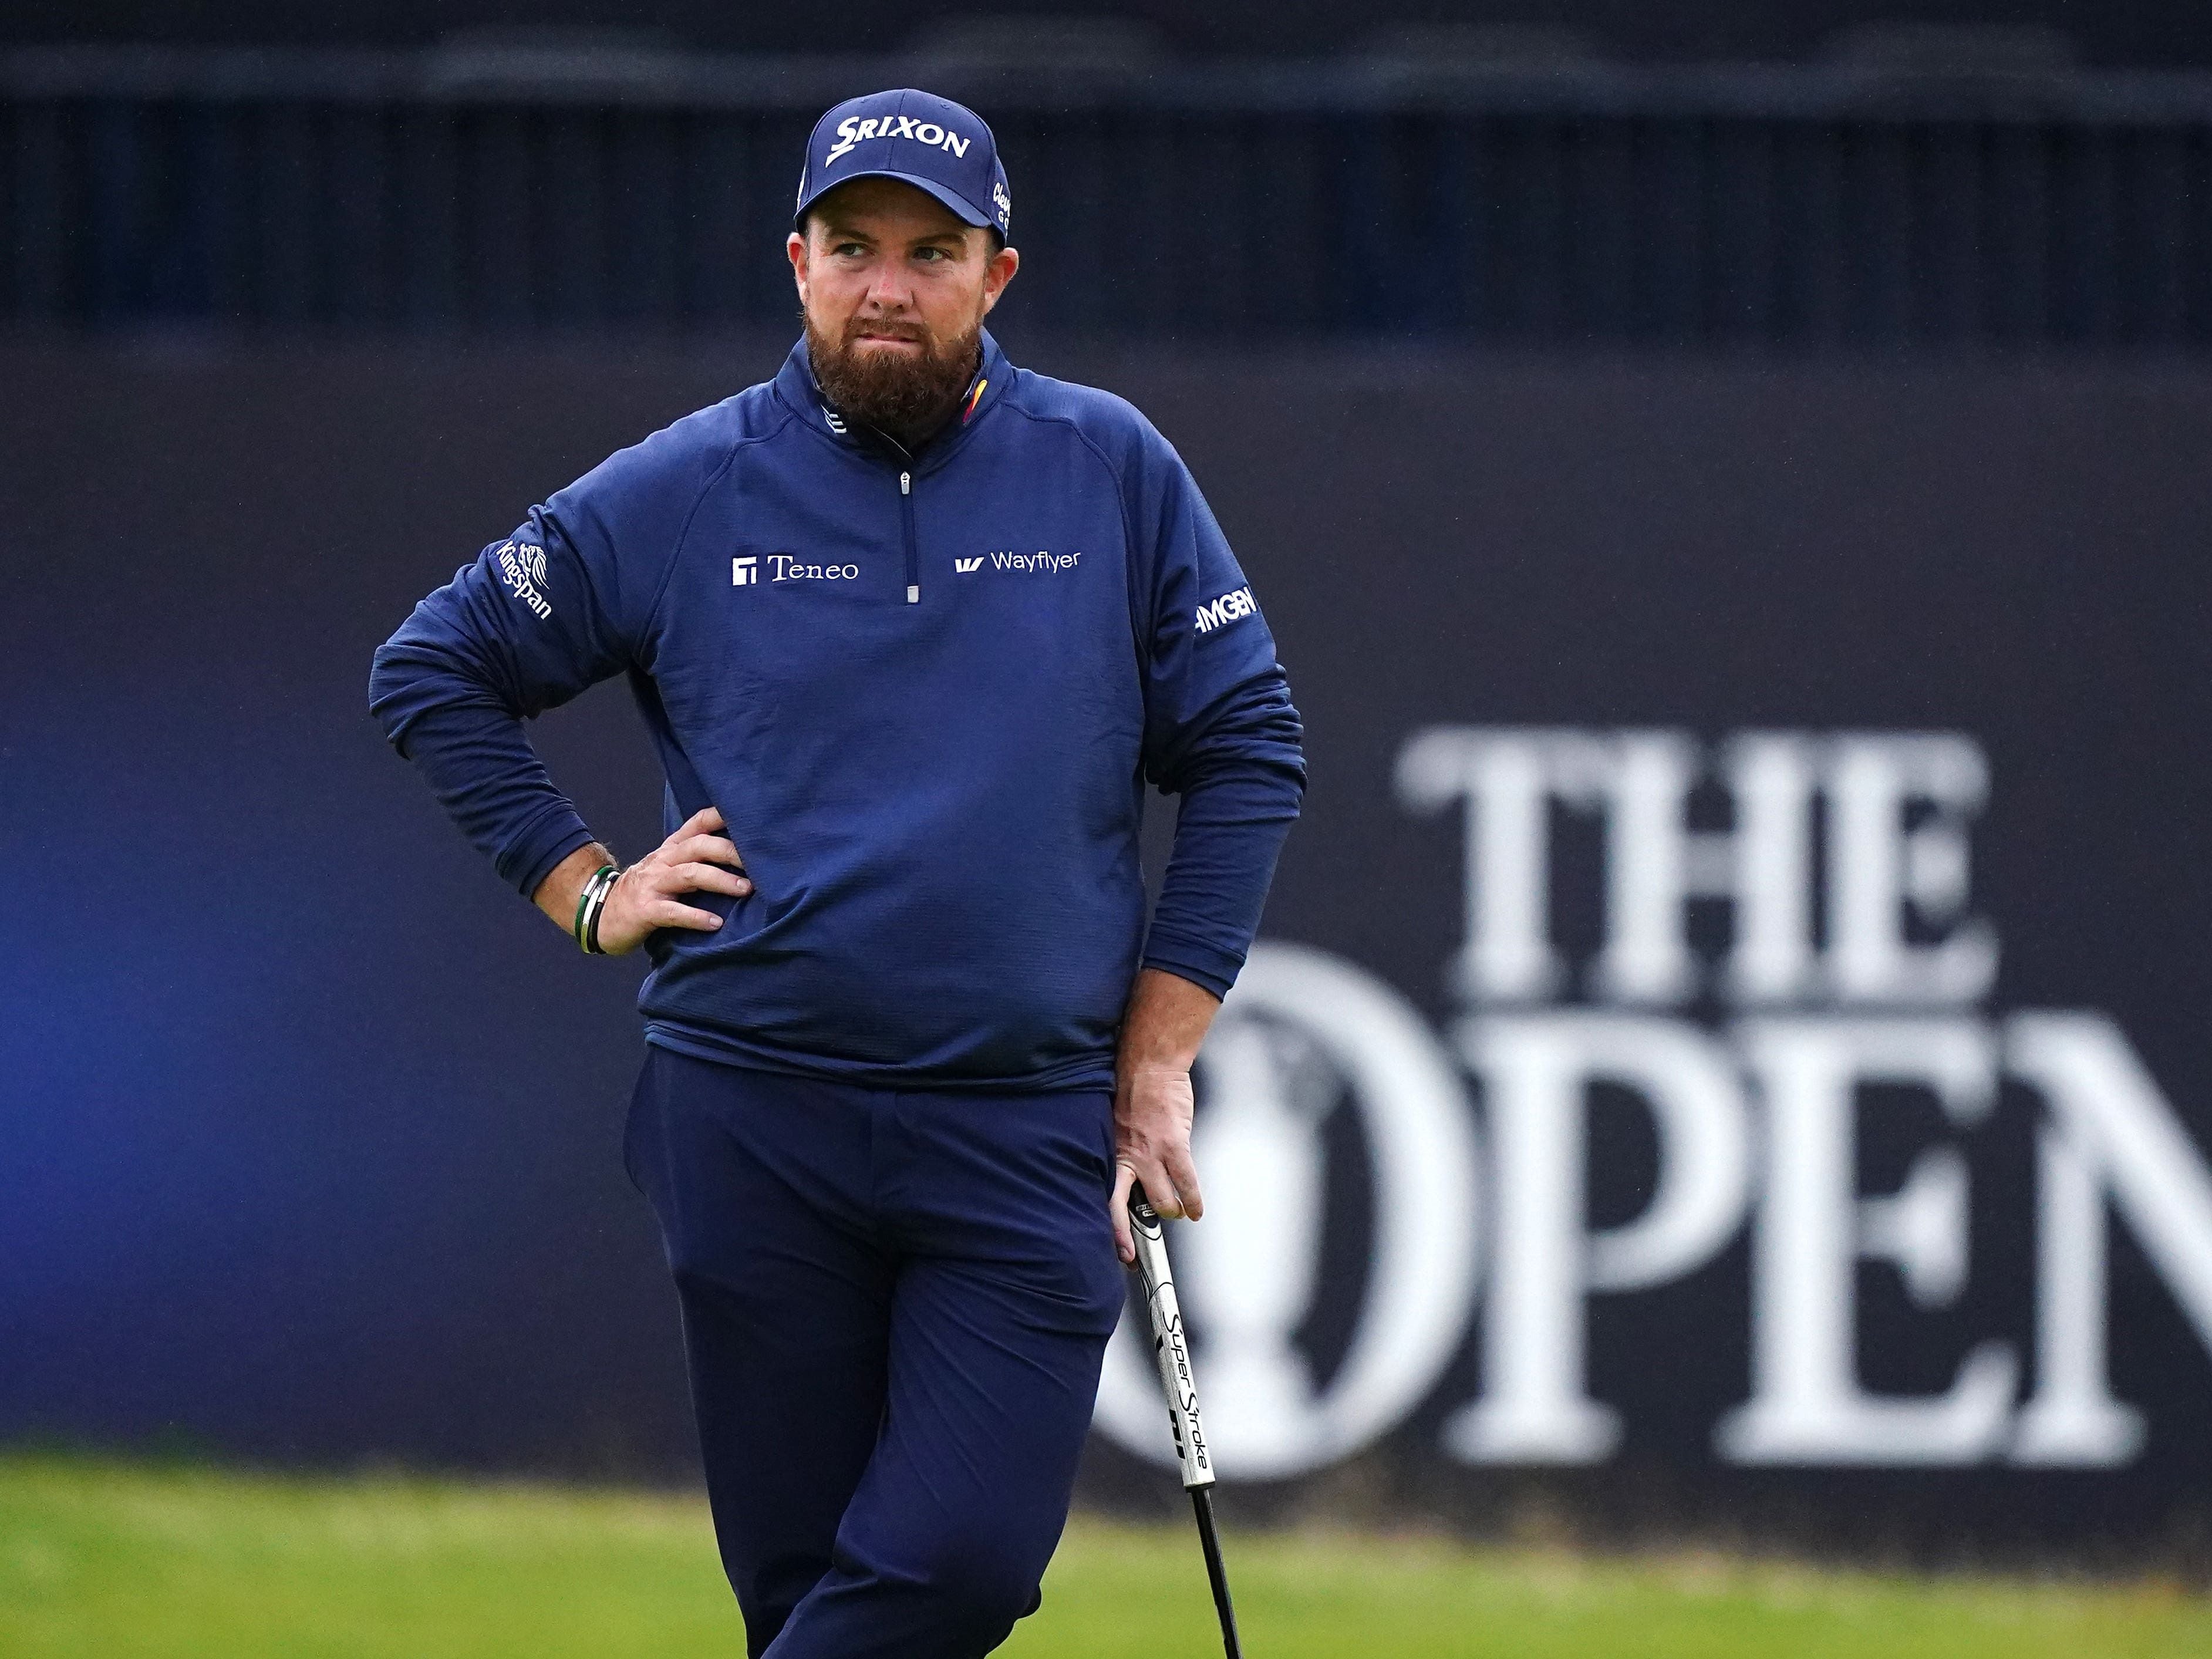 Shane Lowry cards flawless 66 to lead Open as Rory McIlroy hopes all but ended